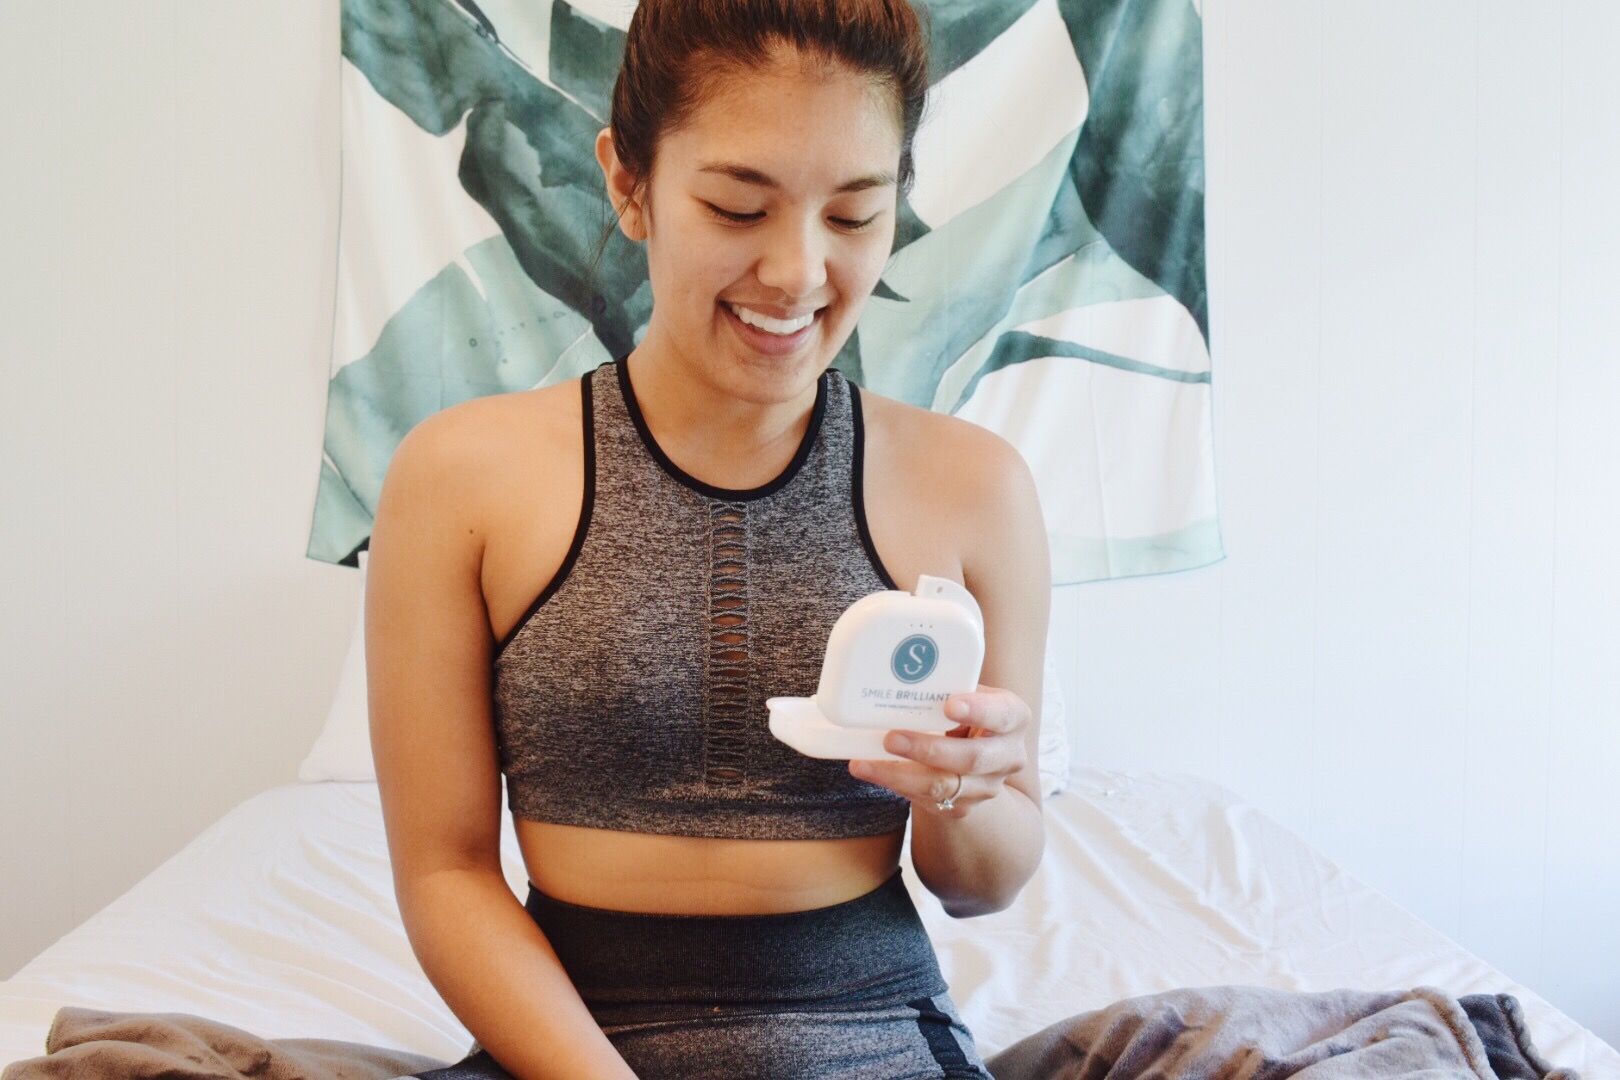 Smile Brilliant Review - At Home Teeth Whitening System